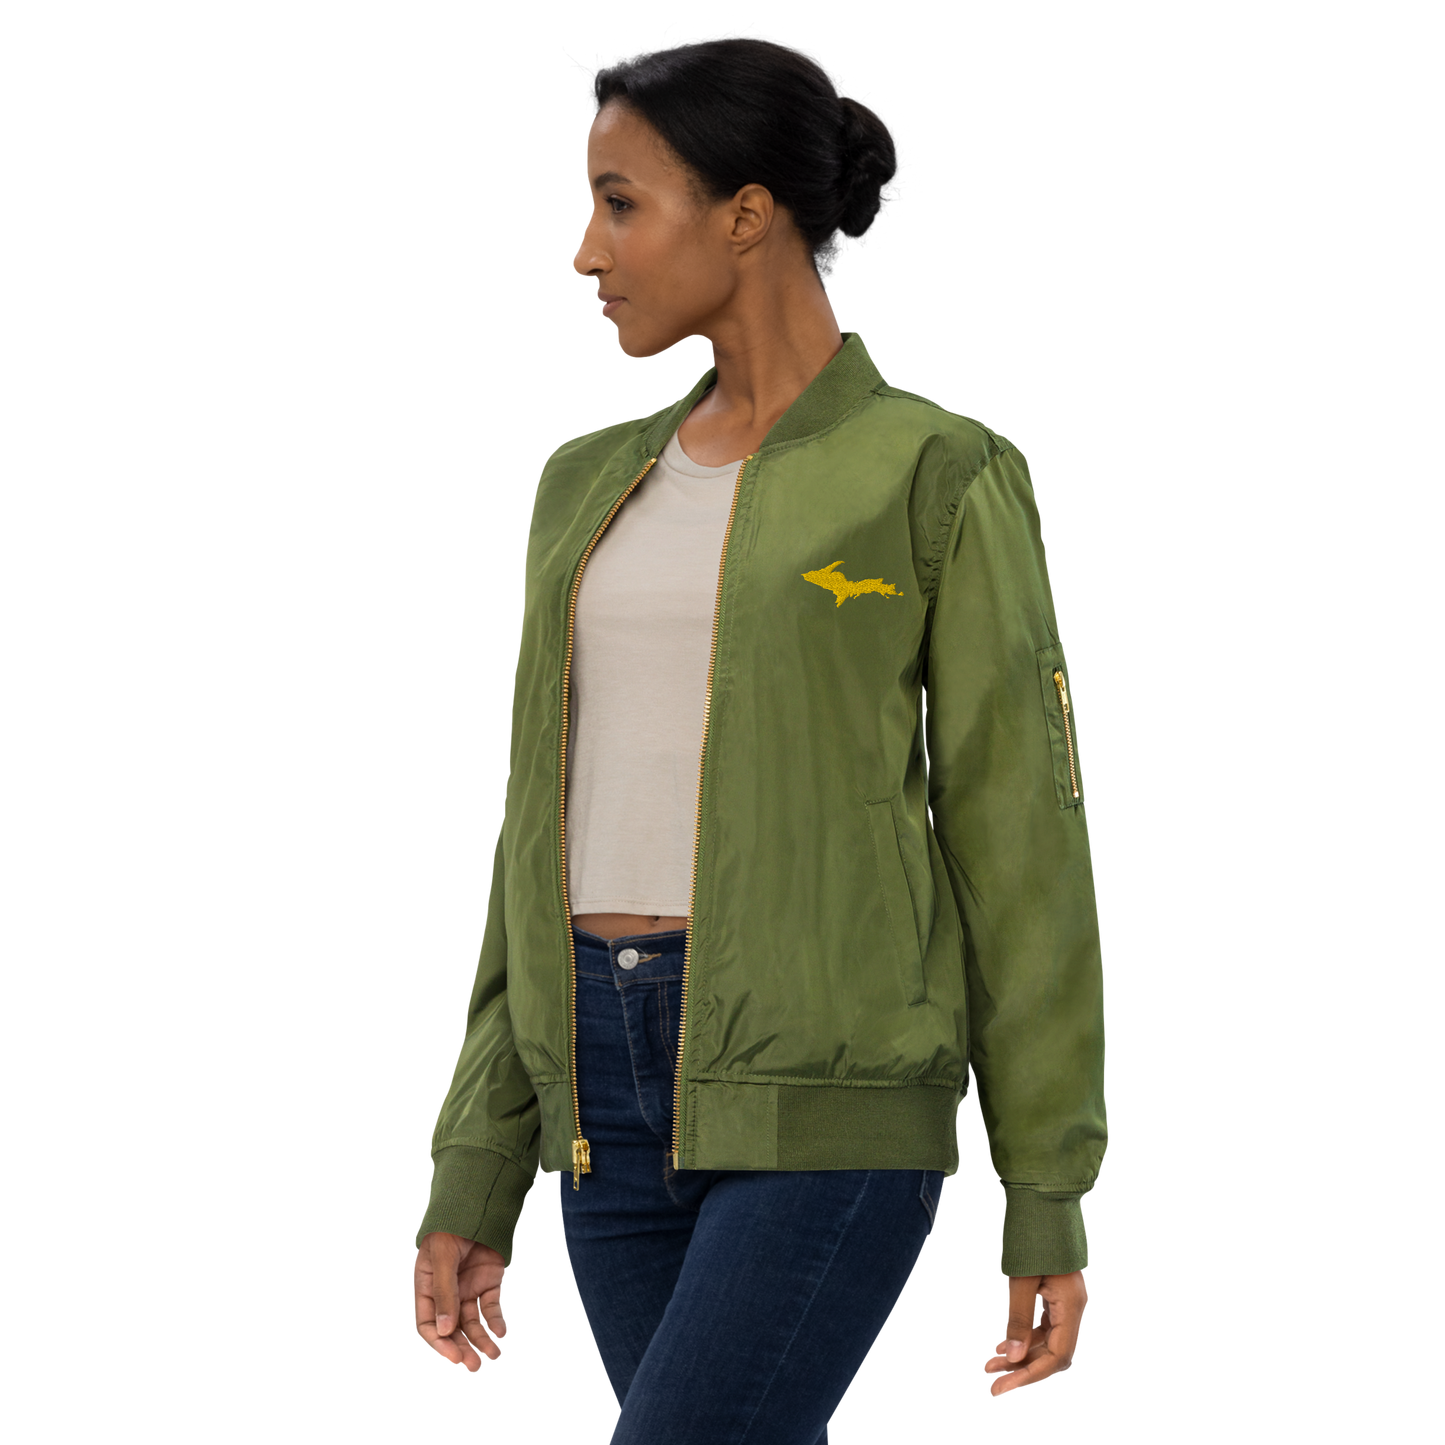 Michigan Upper Peninsula Bomber Jacket (w/ Gold UP Outline)